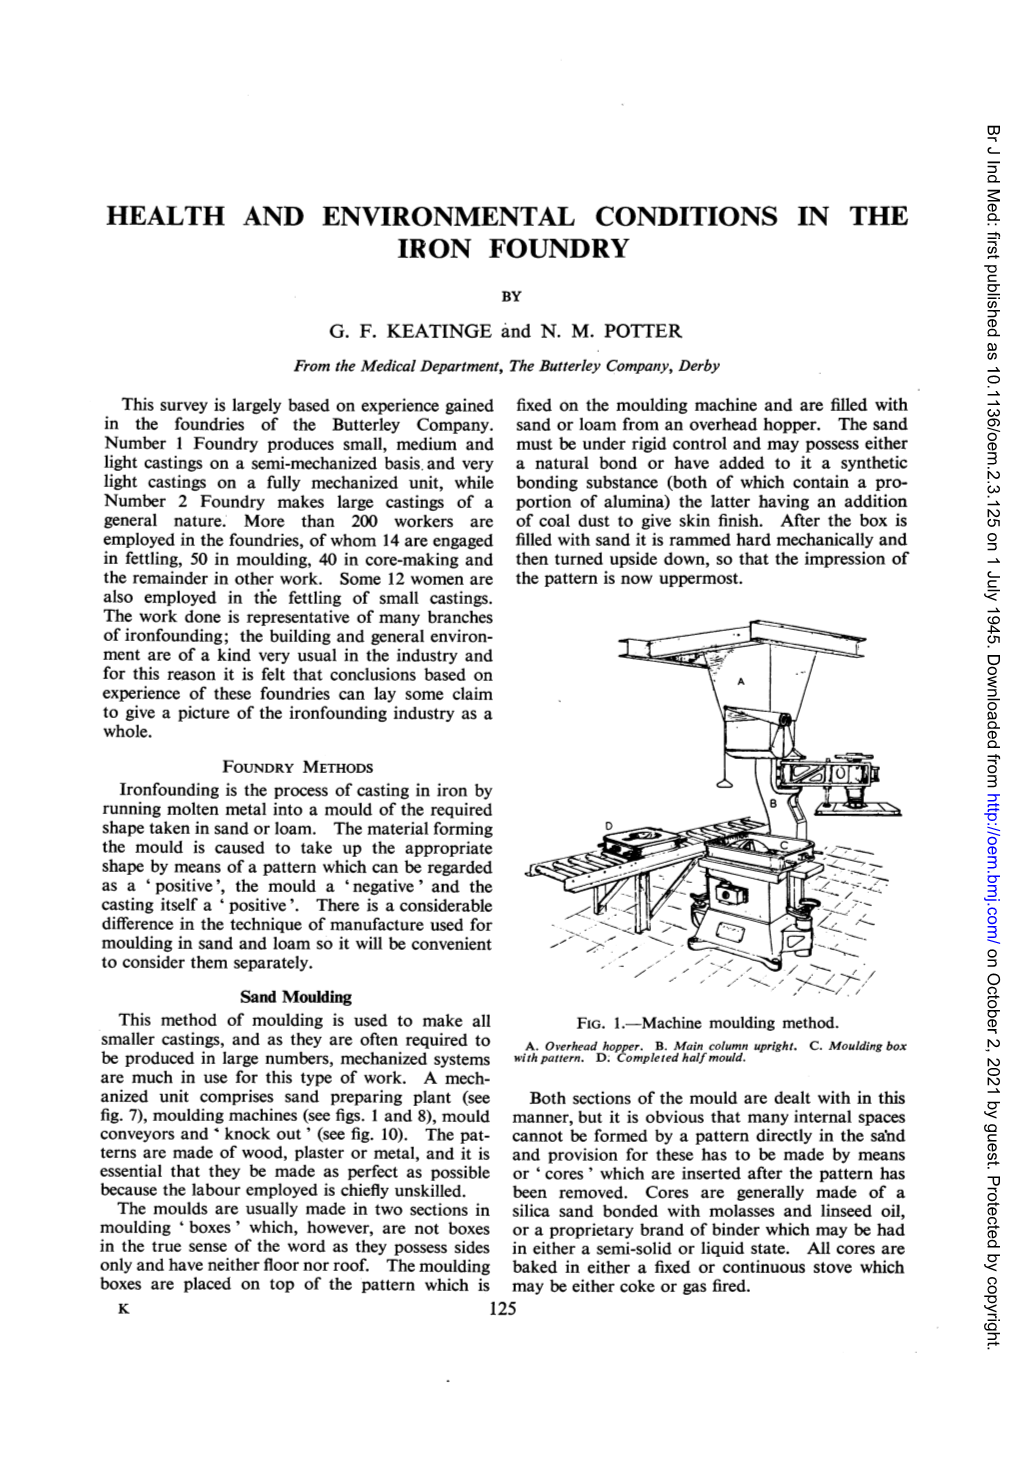 Health and Environmental Conditions in the Iron Foundry